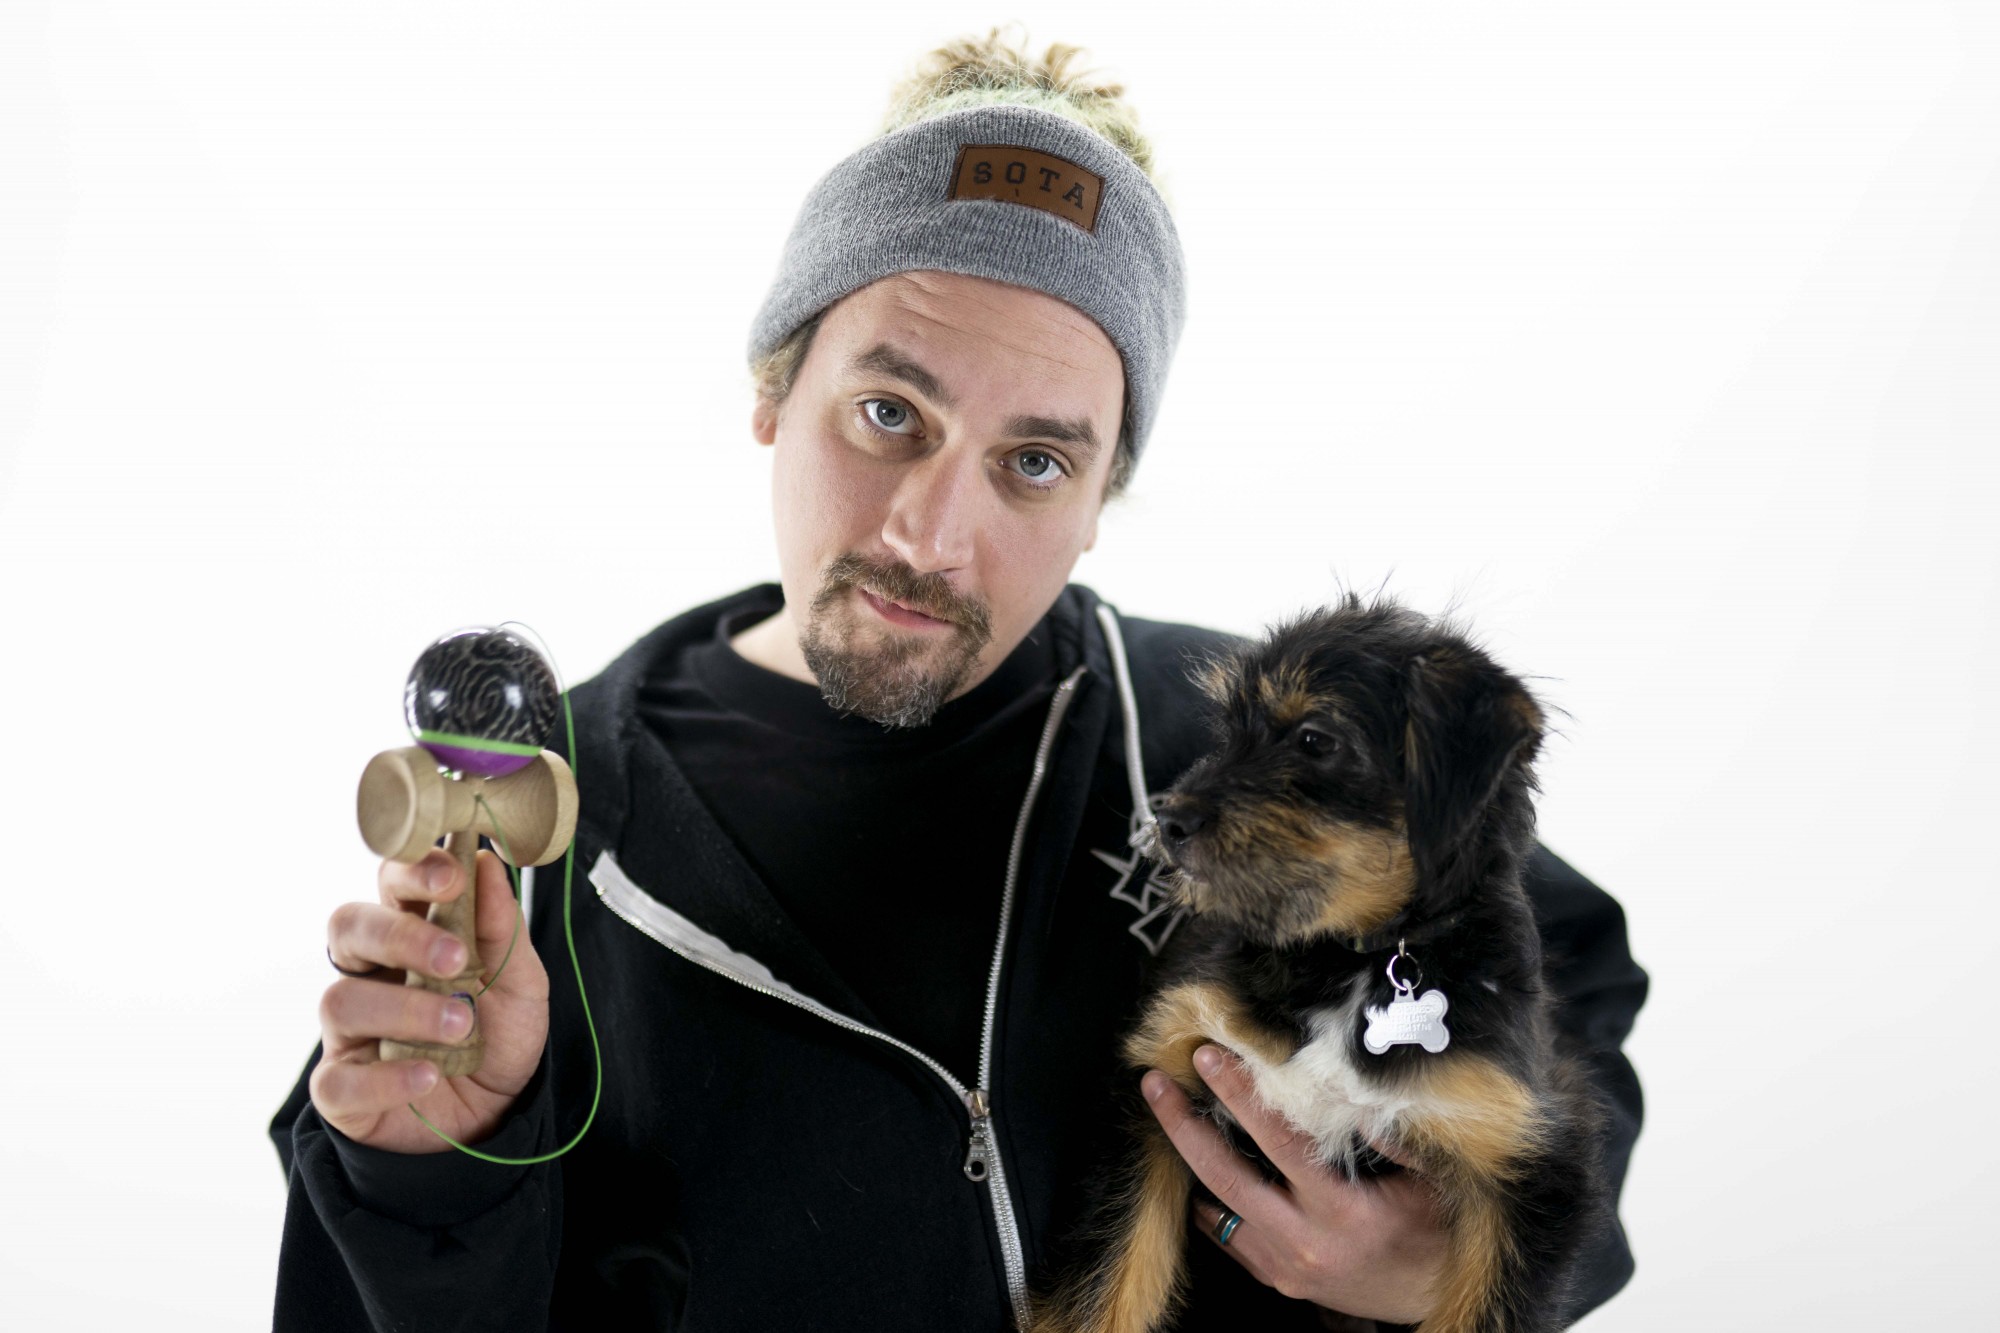 Matt Jorgenson, otherwise known as Sweets, poses for a portrait with his dog, Taz, on Monday, Dec. 2. Jorgenson, a University of Minnesota alumni, cofounded Sweets Kendamas in 2010 as a way to grow the Kendama community. 